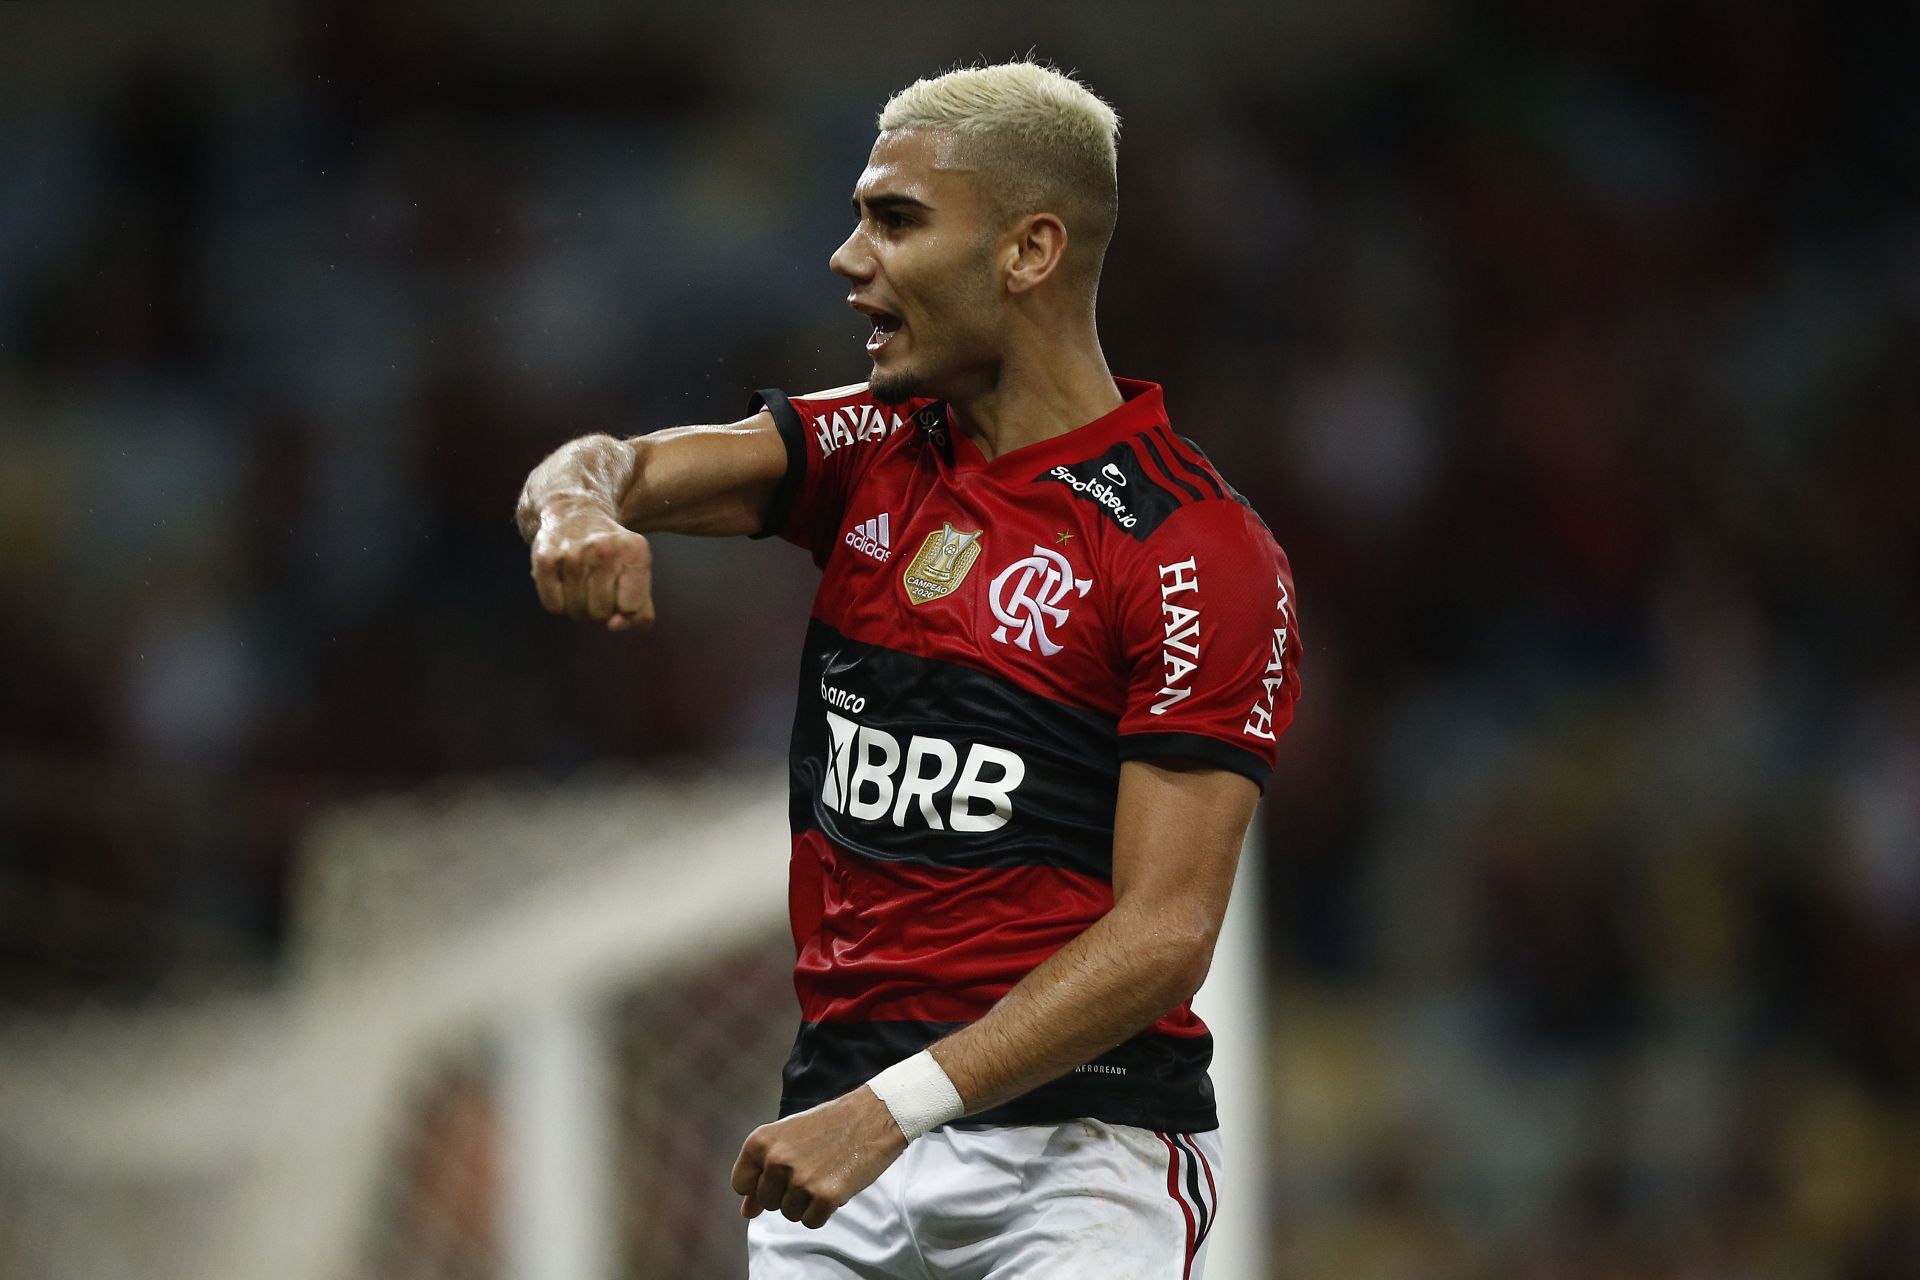 Flamengo have agreed a deal with United to sign Andreas Pereira.